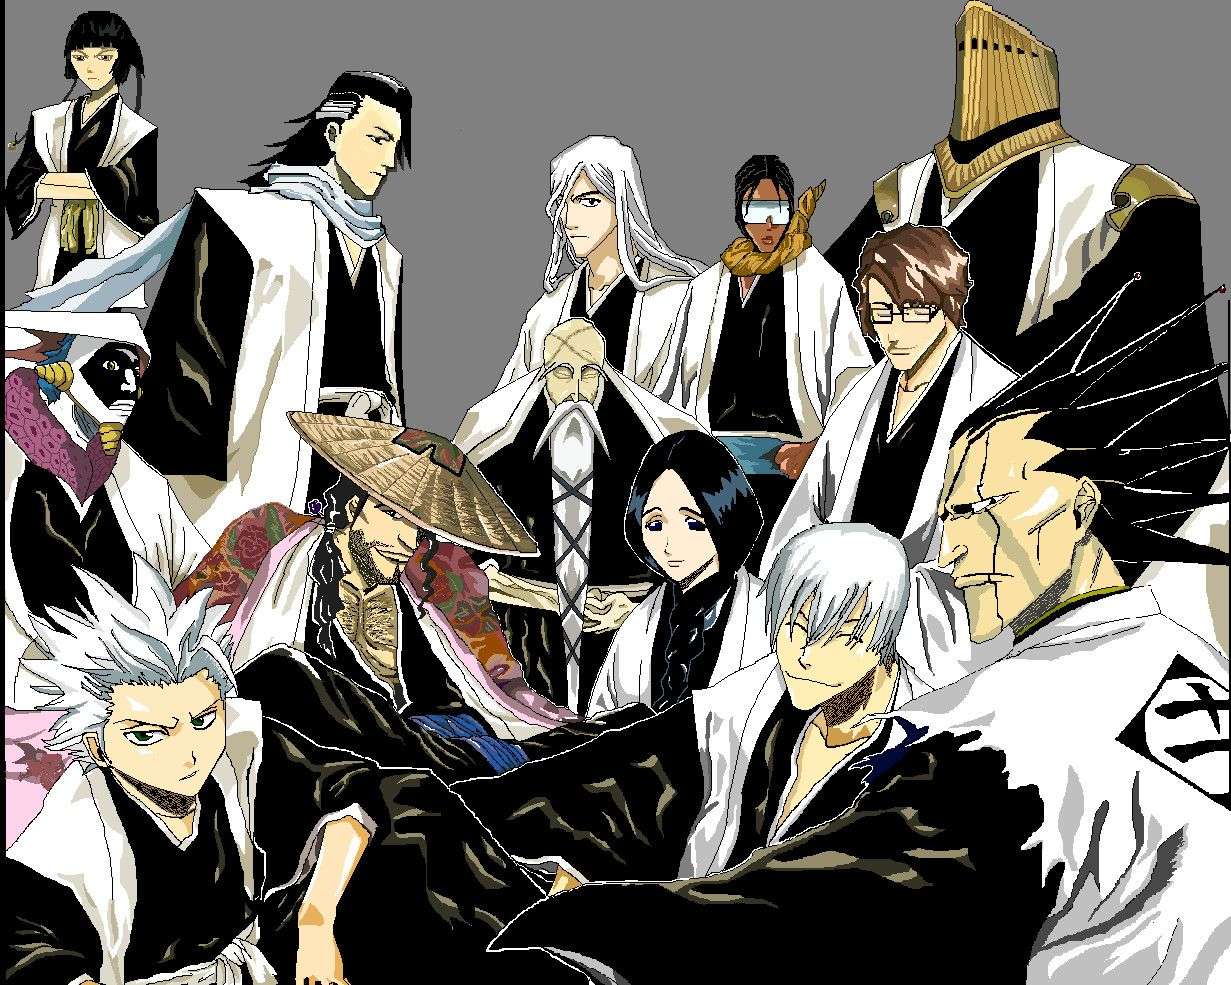 Has Bleach Lost Its Status As One Of The Big Three Anime?